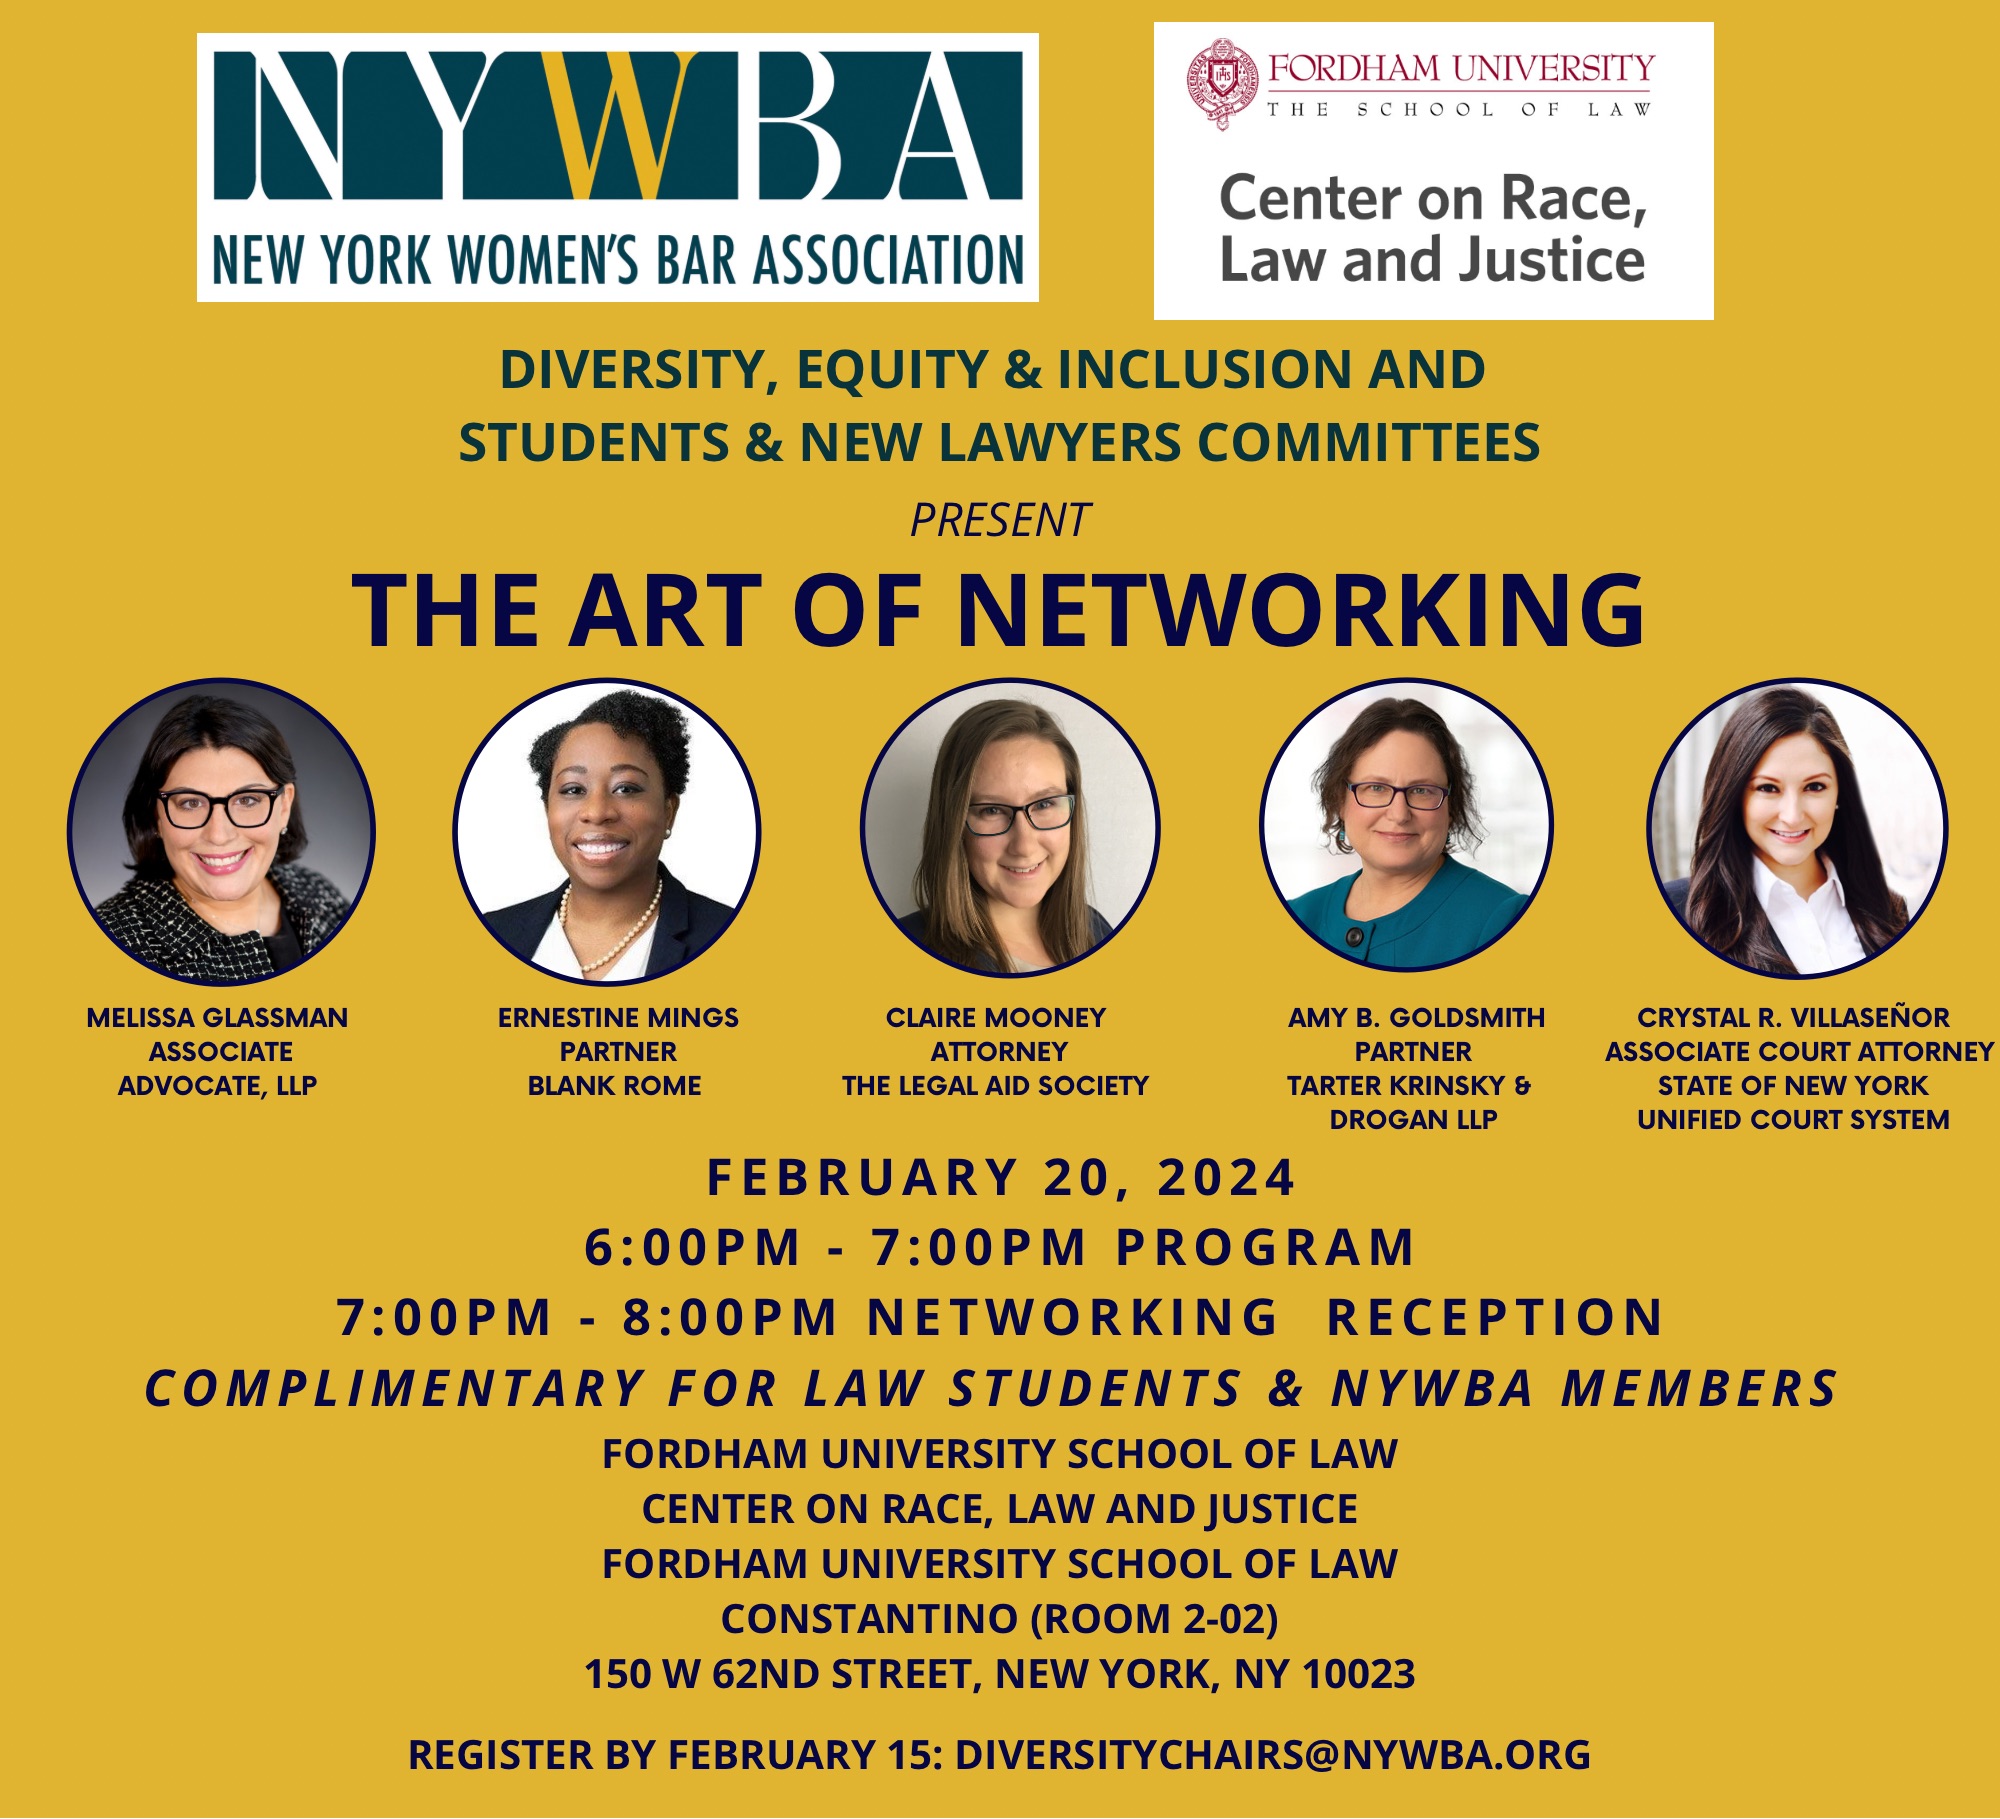 The Art of Networking | NYWBA